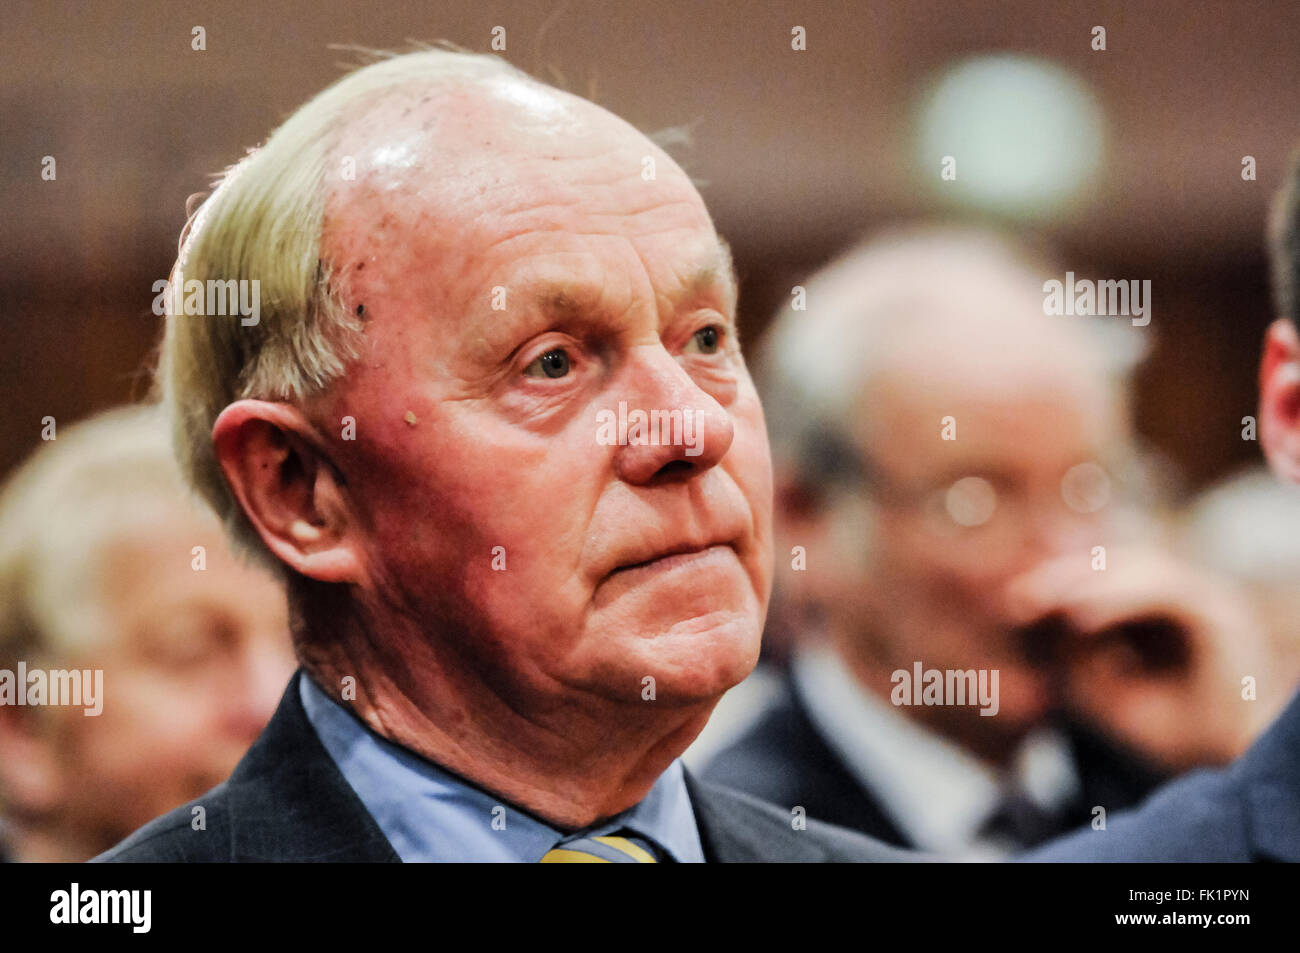 Belfast, Northern Ireland. 05 Mar 2016 - MLA for Strangford, Kieran McCarthy, at the Alliance Party 2016 annual conference.  Mr McCarthy has indicated that he will not be standing in the upcoming Stormont election. Credit:  Stephen Barnes/Alamy Live News Stock Photo